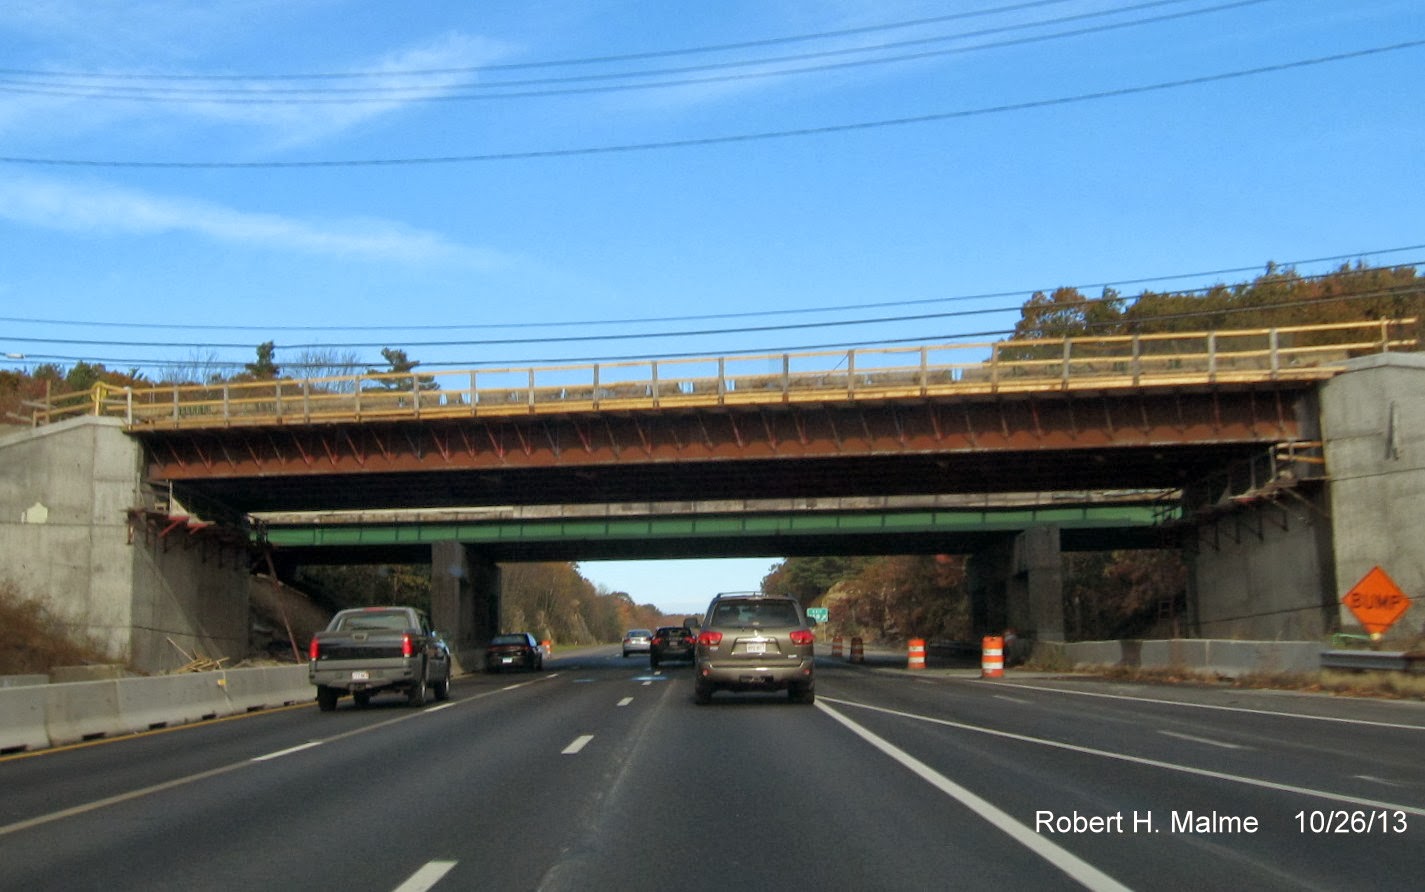 Image with a closeup view of MA 109 Bridge being reconstructed over North i-95 in Dedham, Oct. 2013